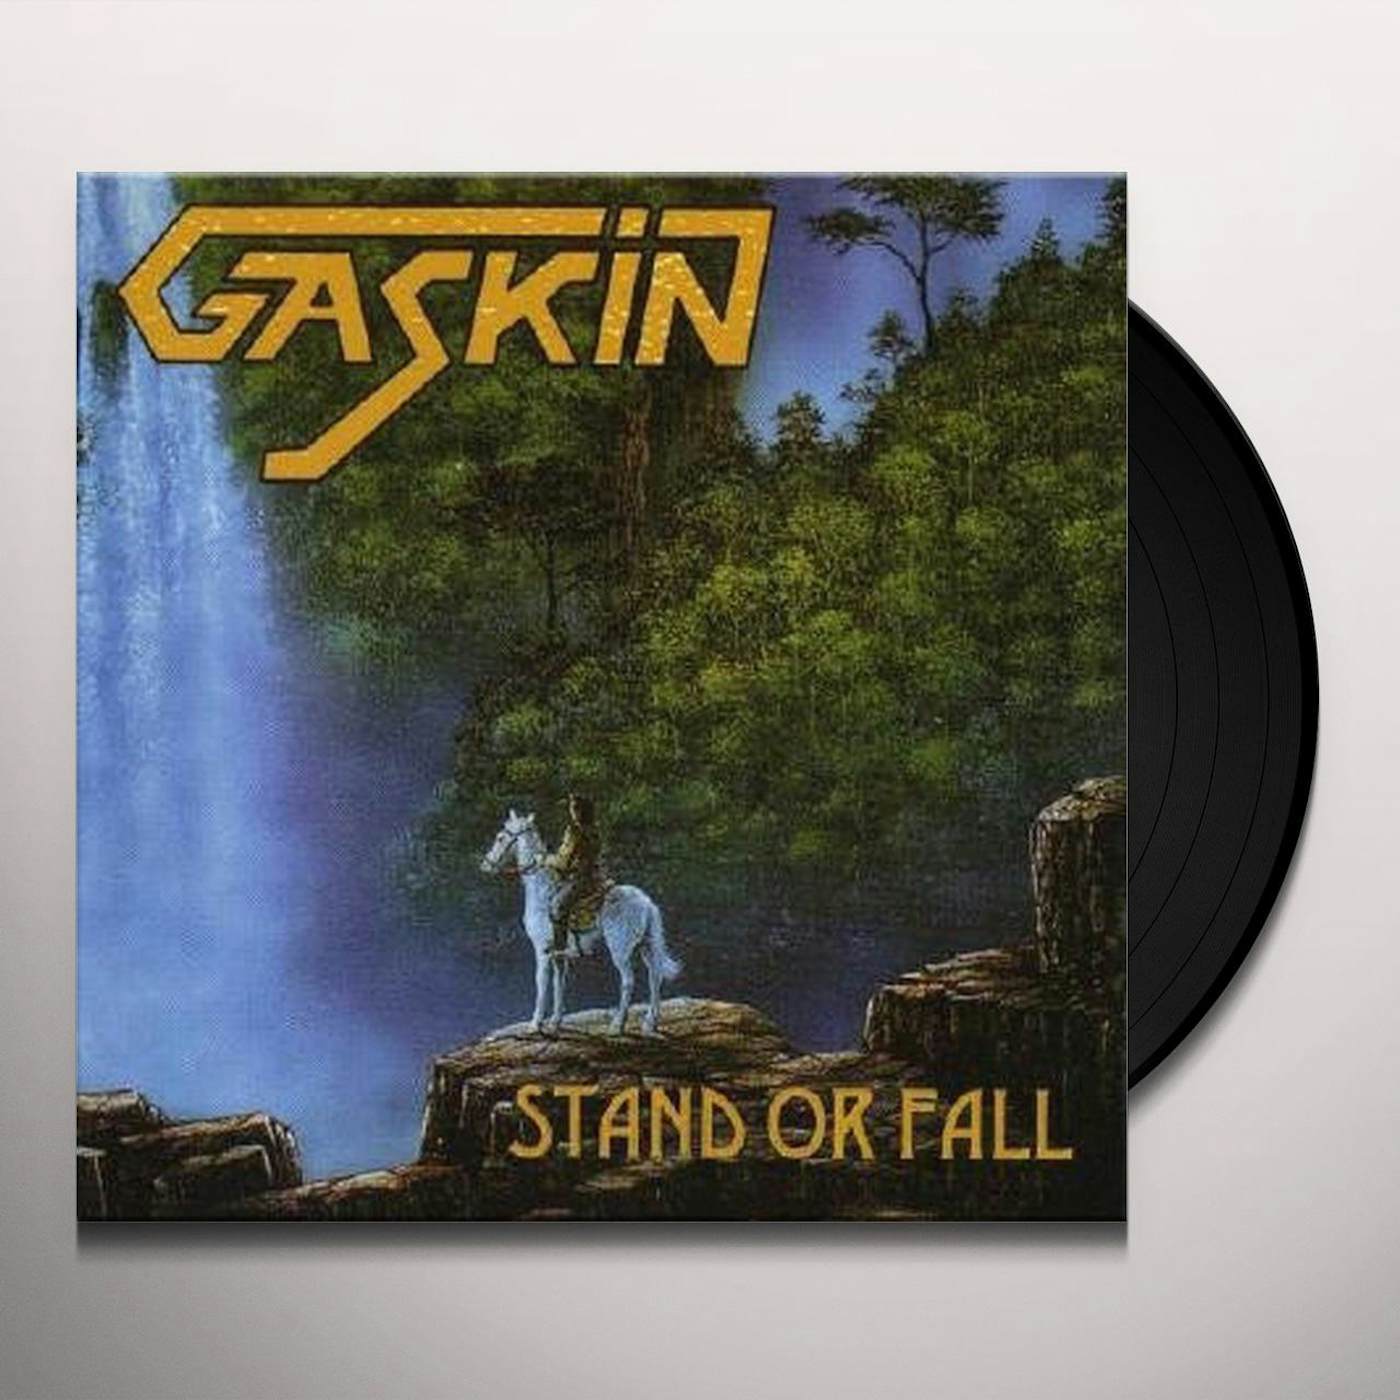 Gaskin STAND OR FALL Vinyl Record - Holland Release